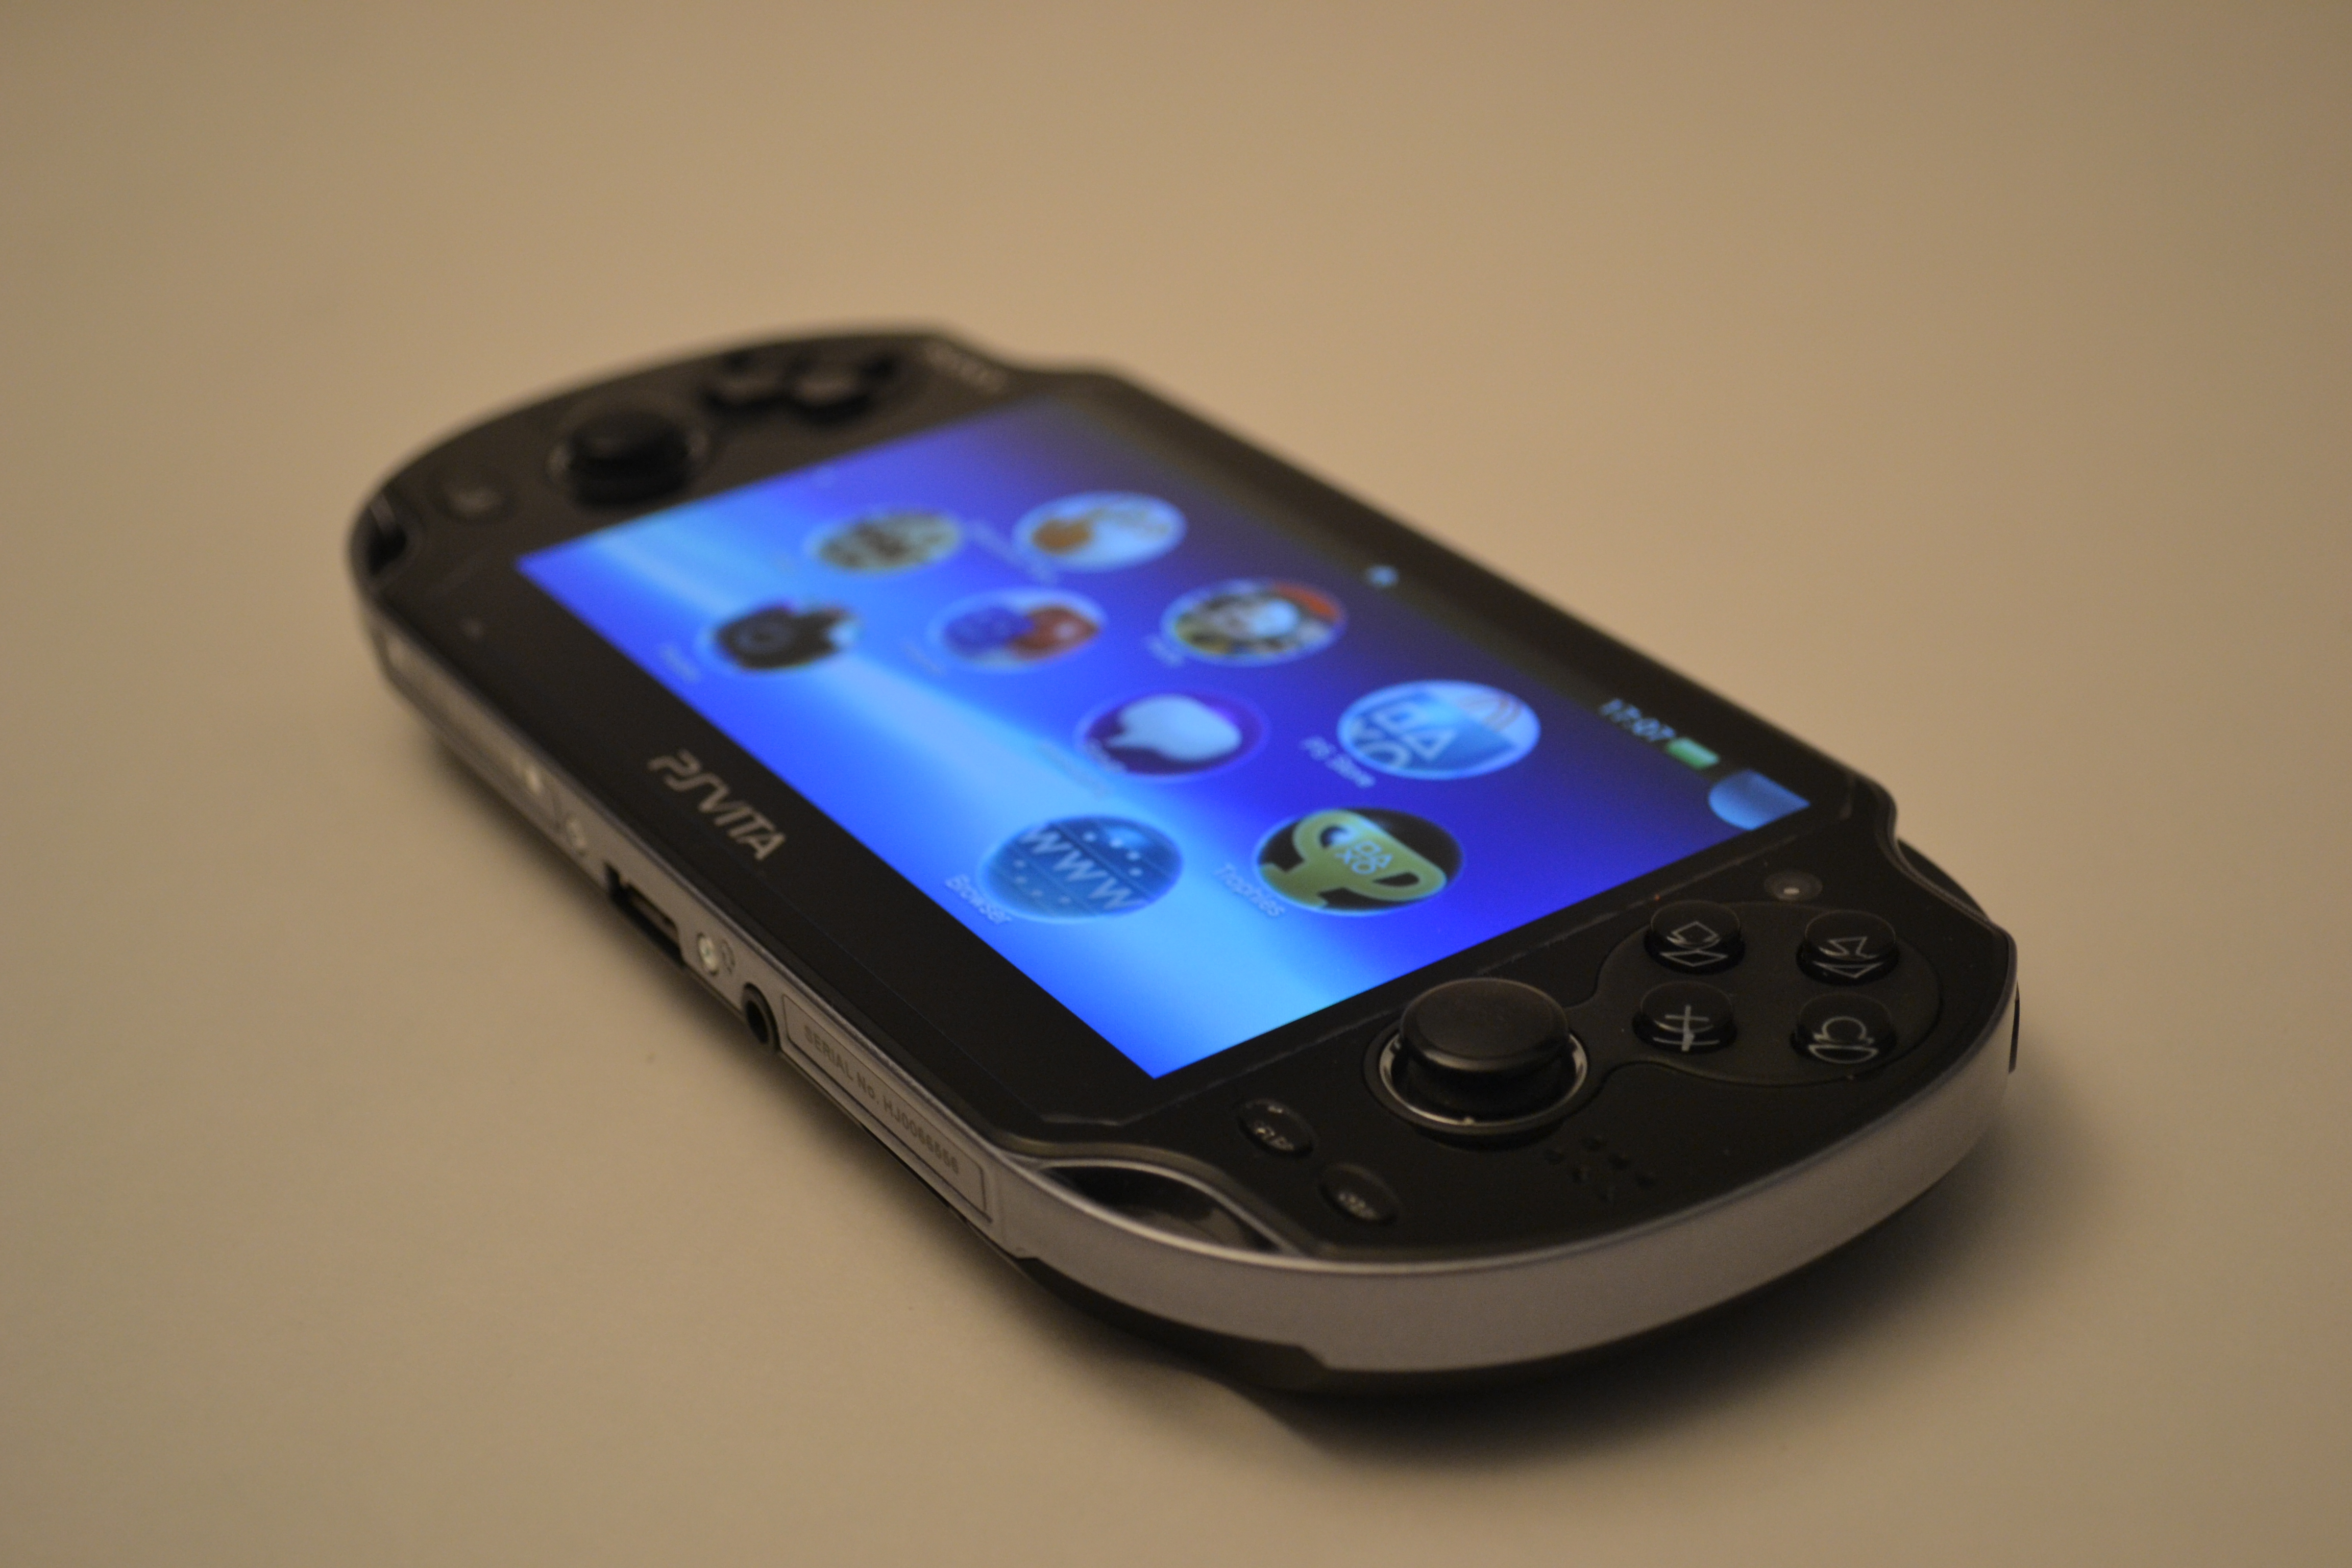 PlayStation Vita: Tips in Conserving the Battery